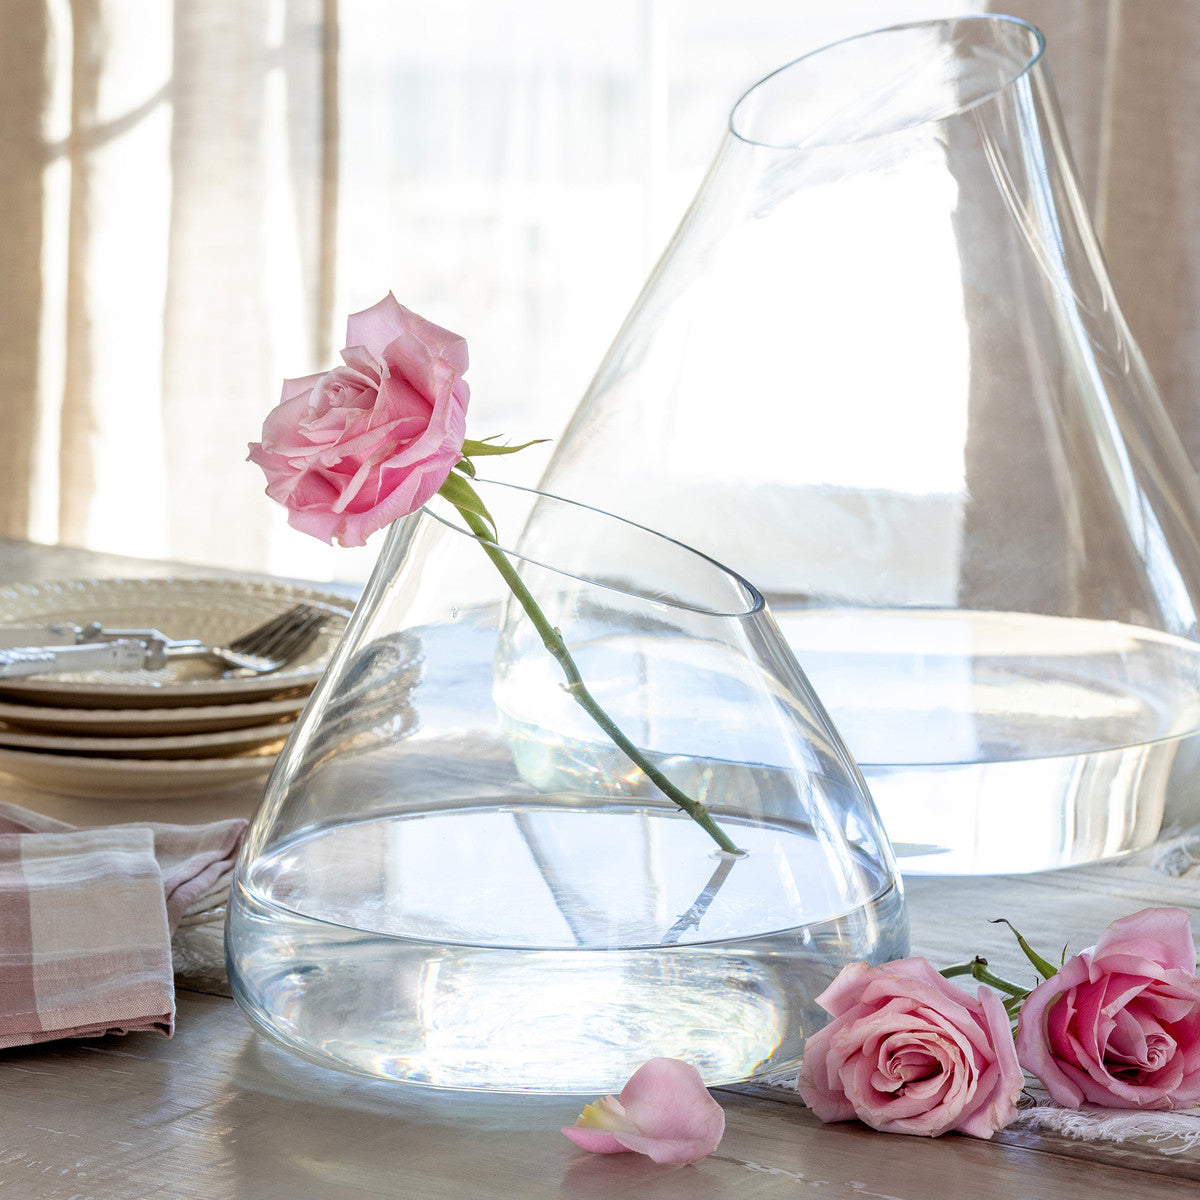 two-tear-drop-shaped-assymetrical-clear-glass-vases-with-pink-roses